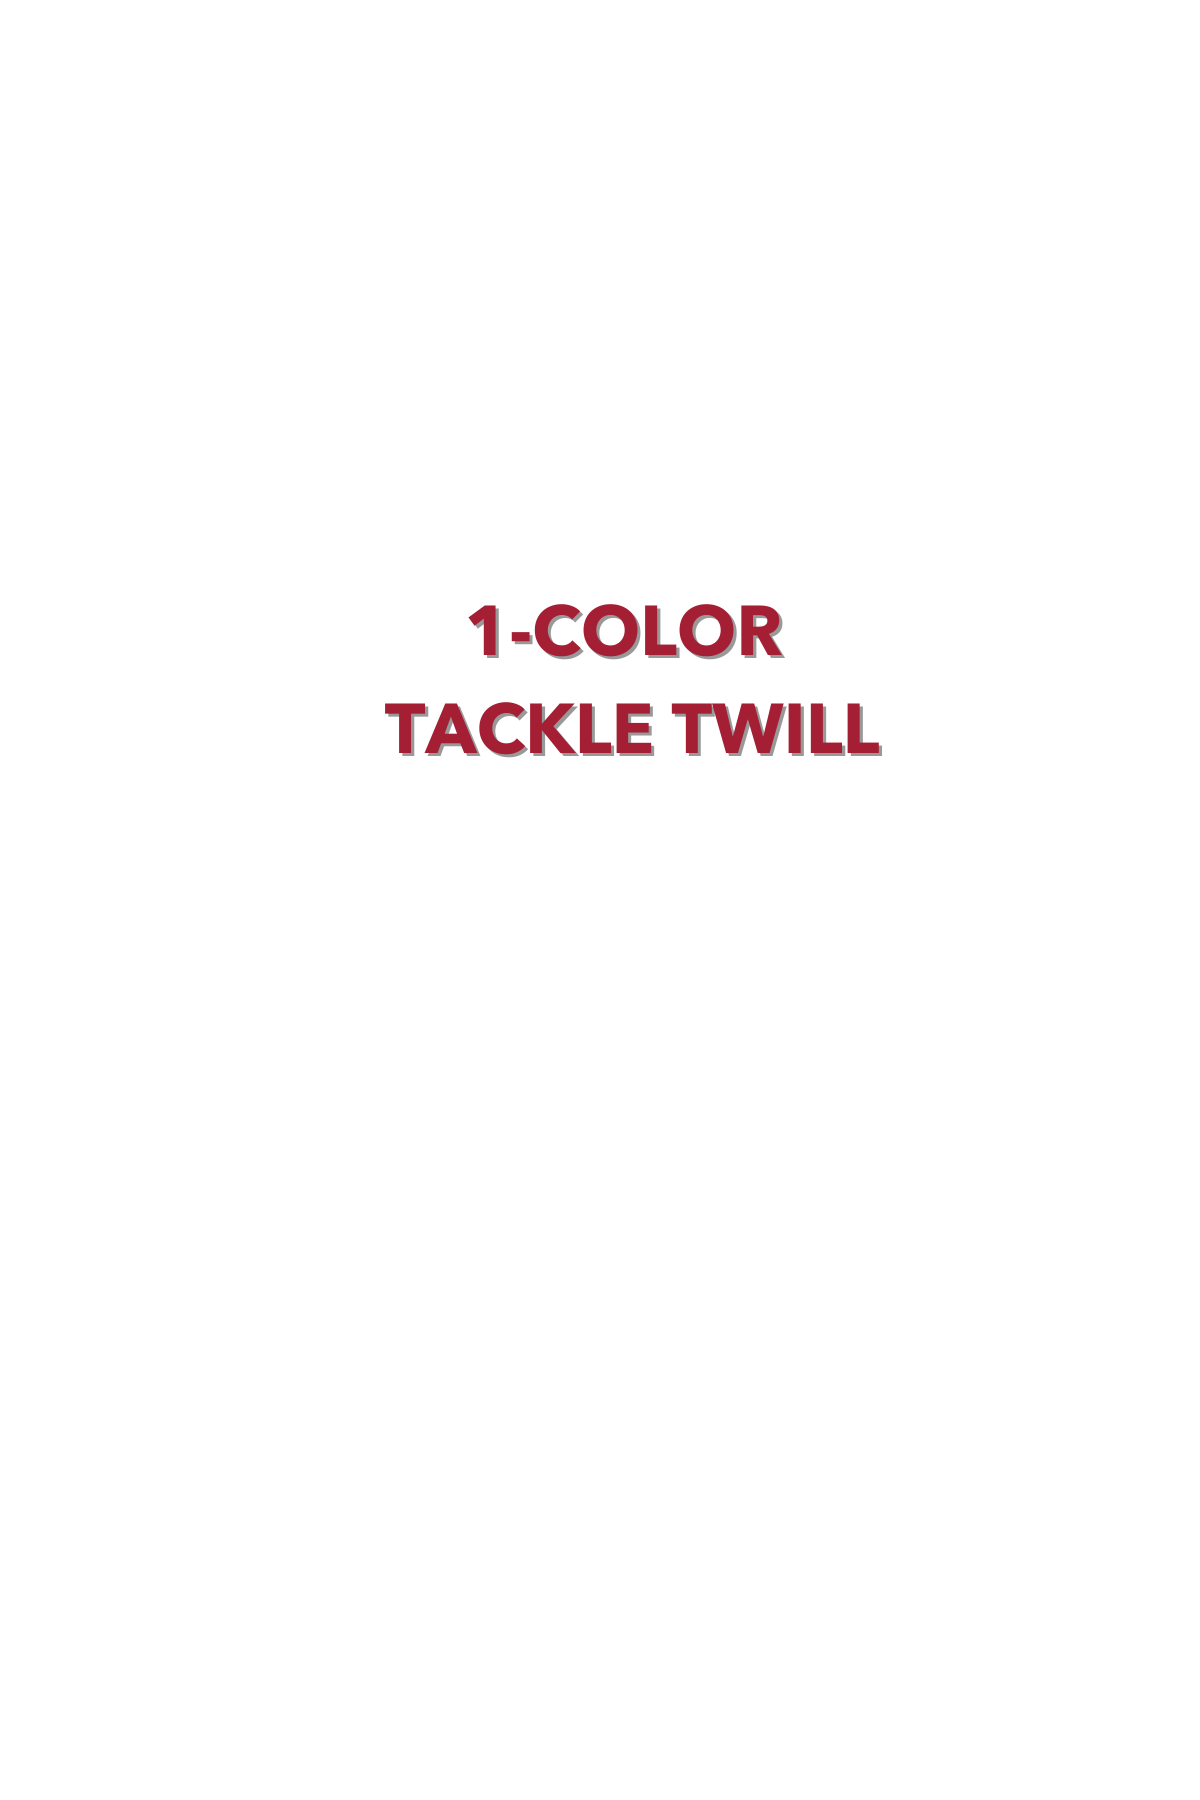 TACKLE TWILL 1-COLOR